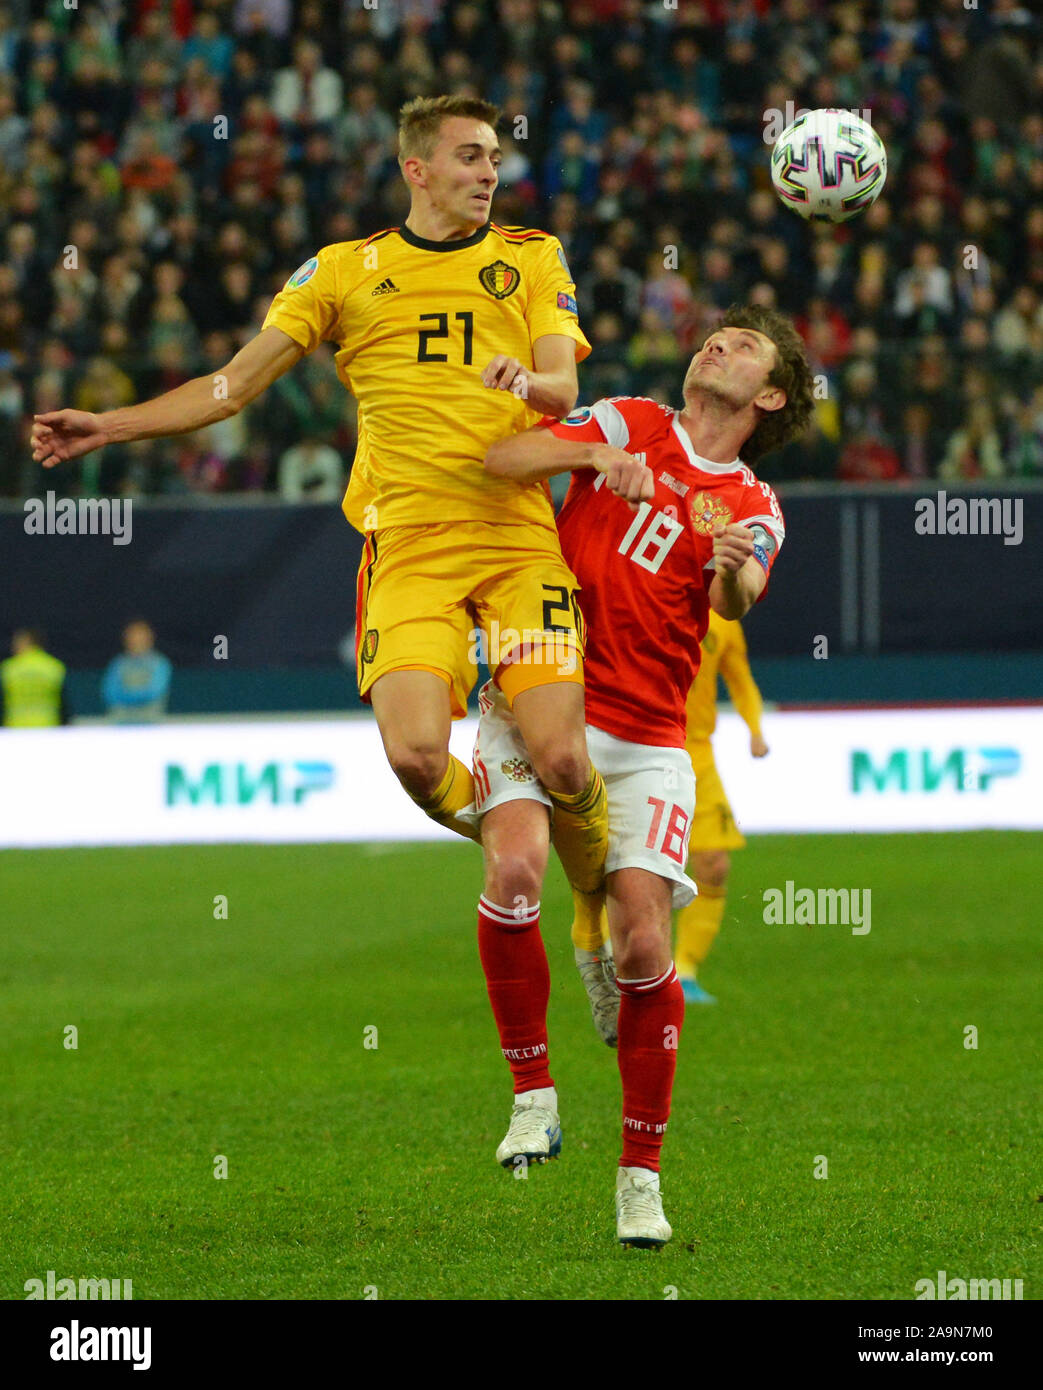 St. Petersburg, Russia. 16th Nov, 2019. Russia, St. Petersburg, November 16, 2019. Belgian national team players Timothy Kastan and Russian national team Yuri Zhirkov (left to right) in the qualifying match of the 2020 European Football Championship between the national teams of Russia and Belgium. Credit: Andrey Pronin/ZUMA Wire/Alamy Live News Stock Photo